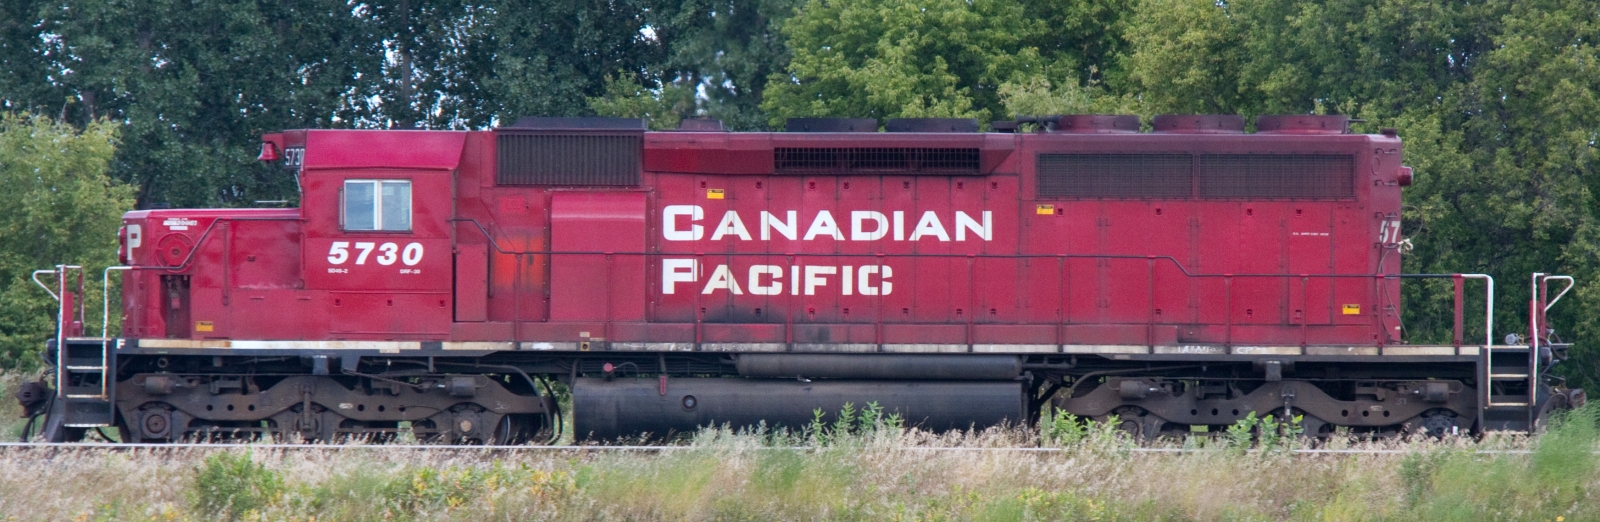 SD40-2 built by GMD in Canada